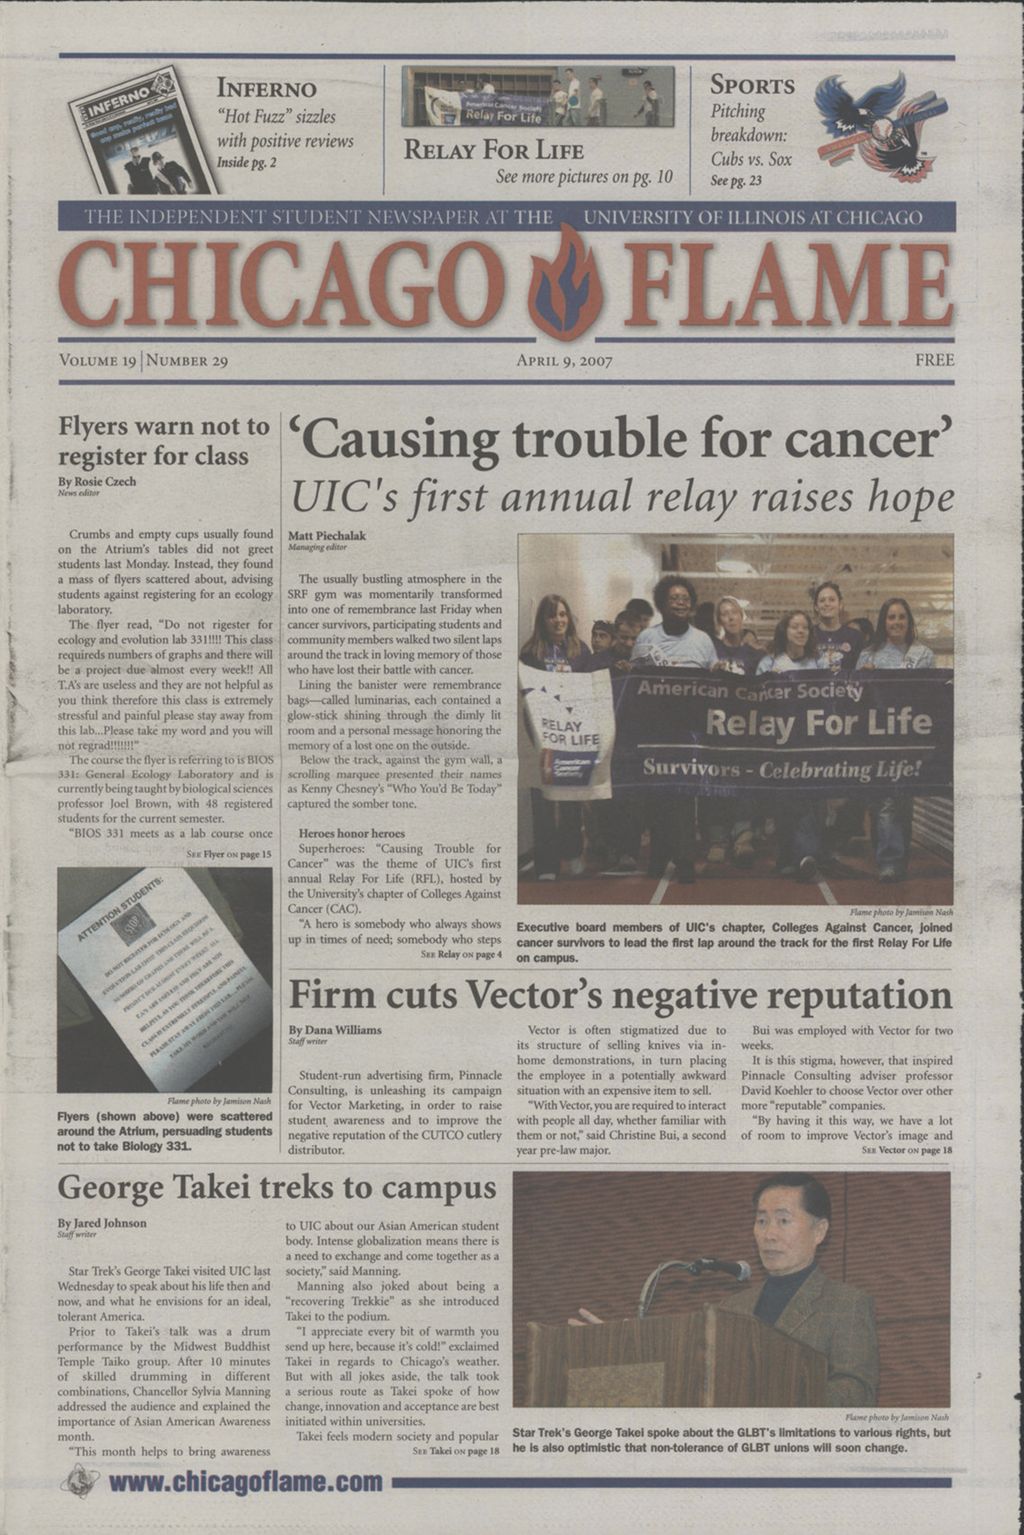 Miniature of Chicago Flame (April 9, 2007)